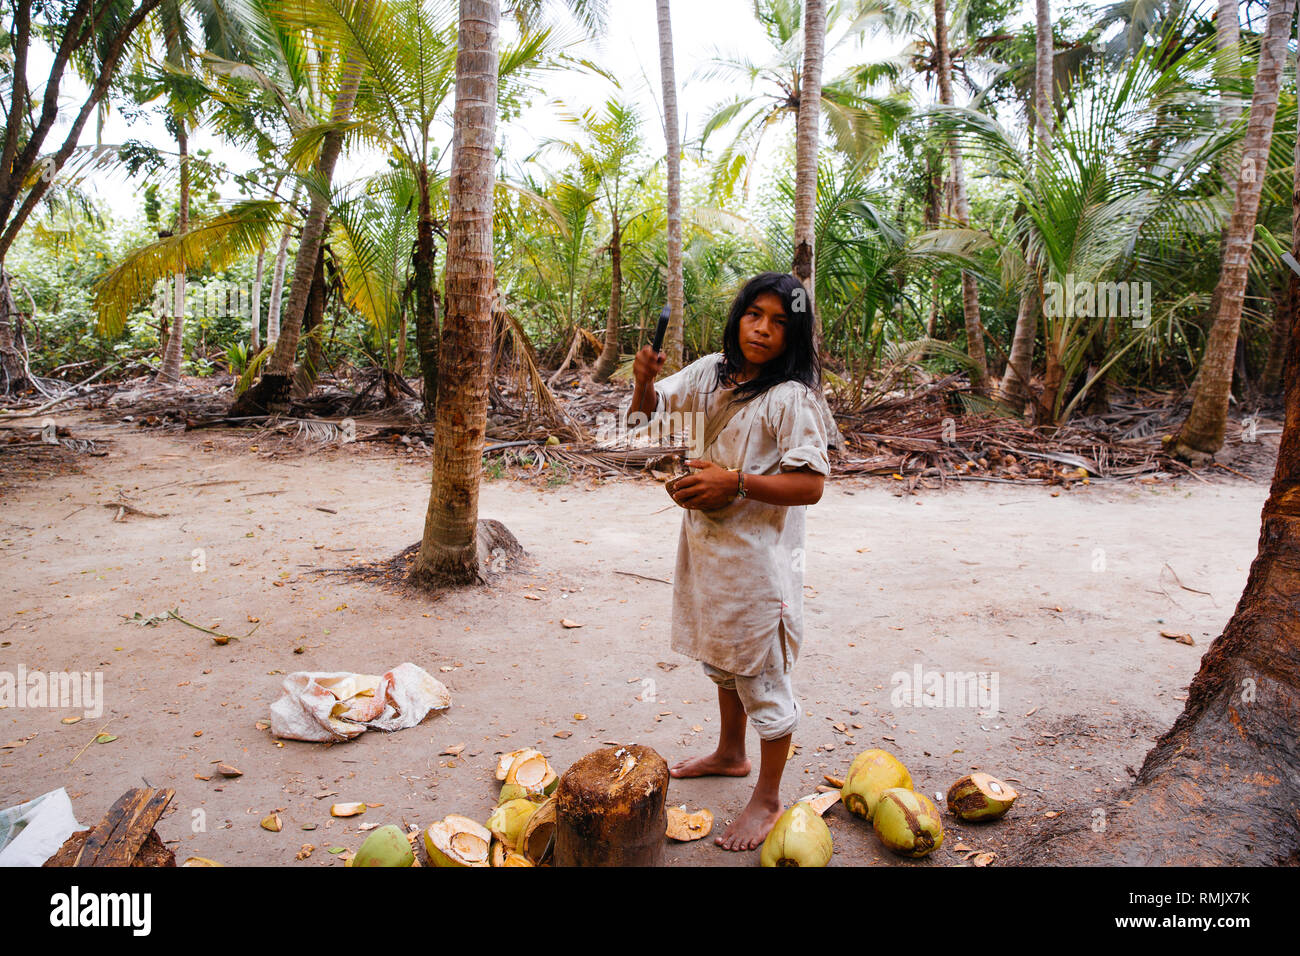 An indigenous local carves a coconut in the Parque Nacional Natural Tayrona in Santa Marta, Colombia Stock Photo